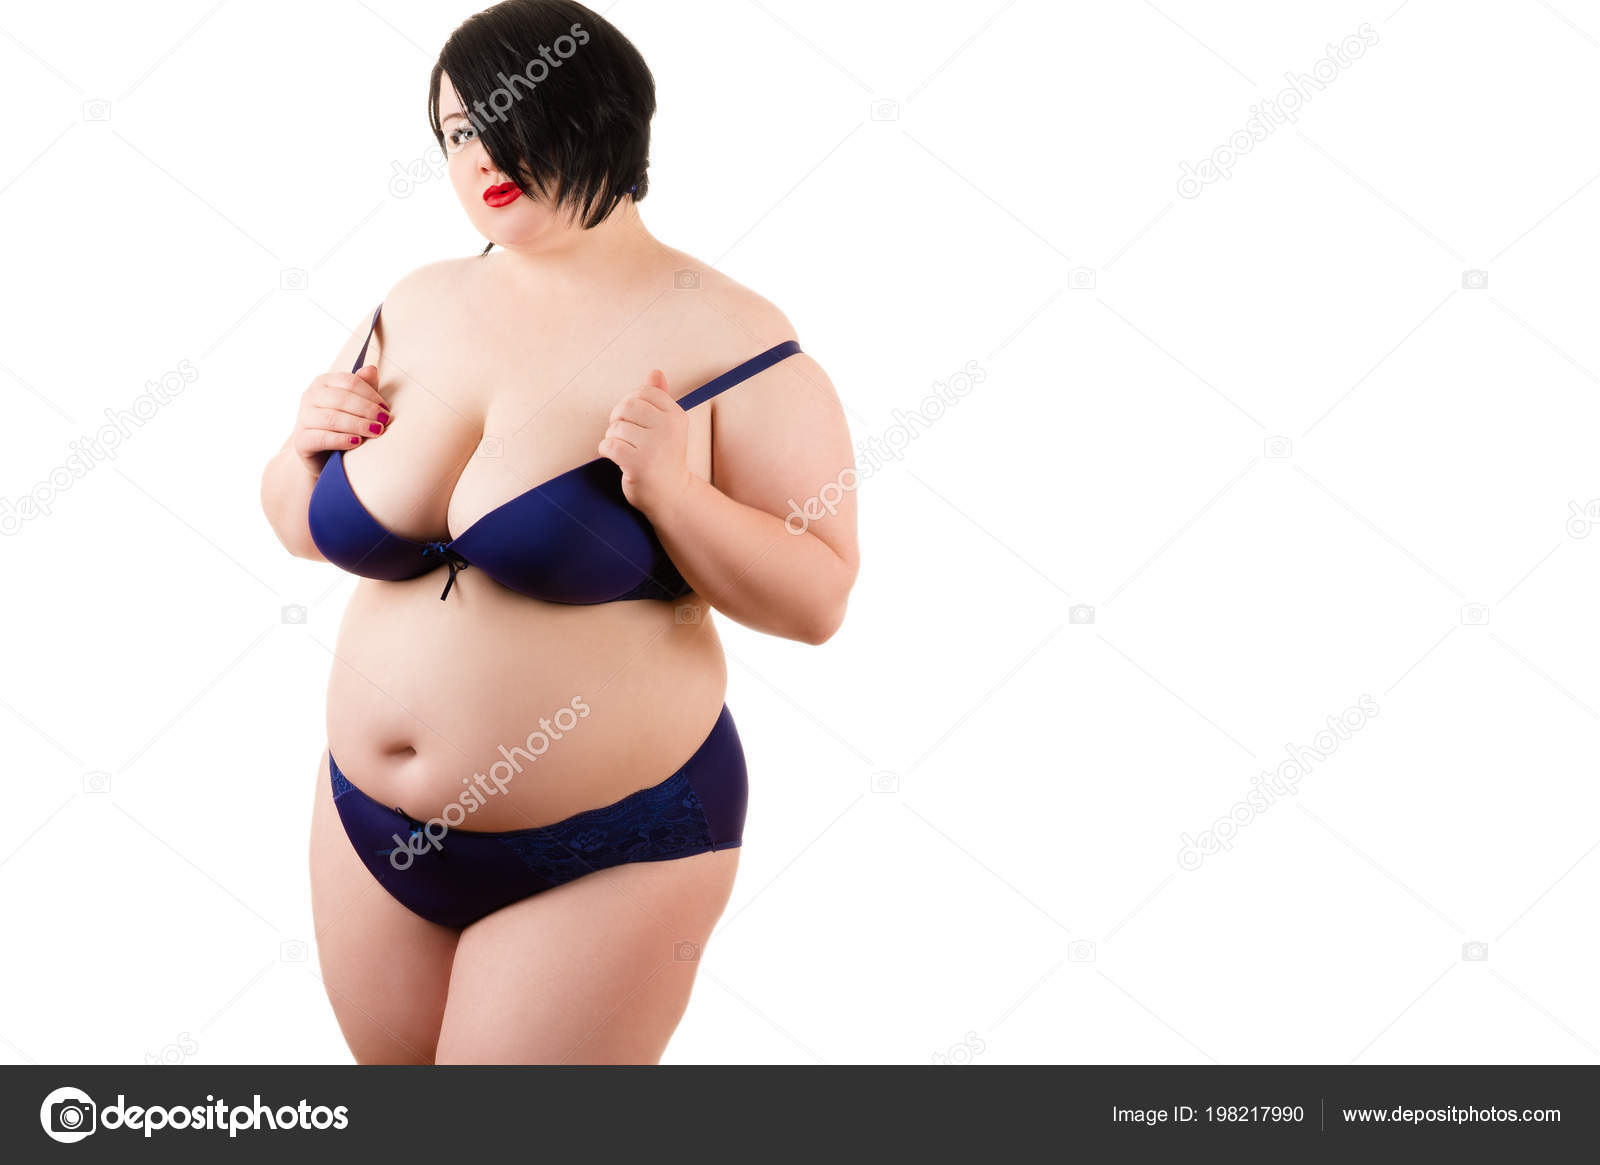 Worid Sexy Fat Womaen Pic